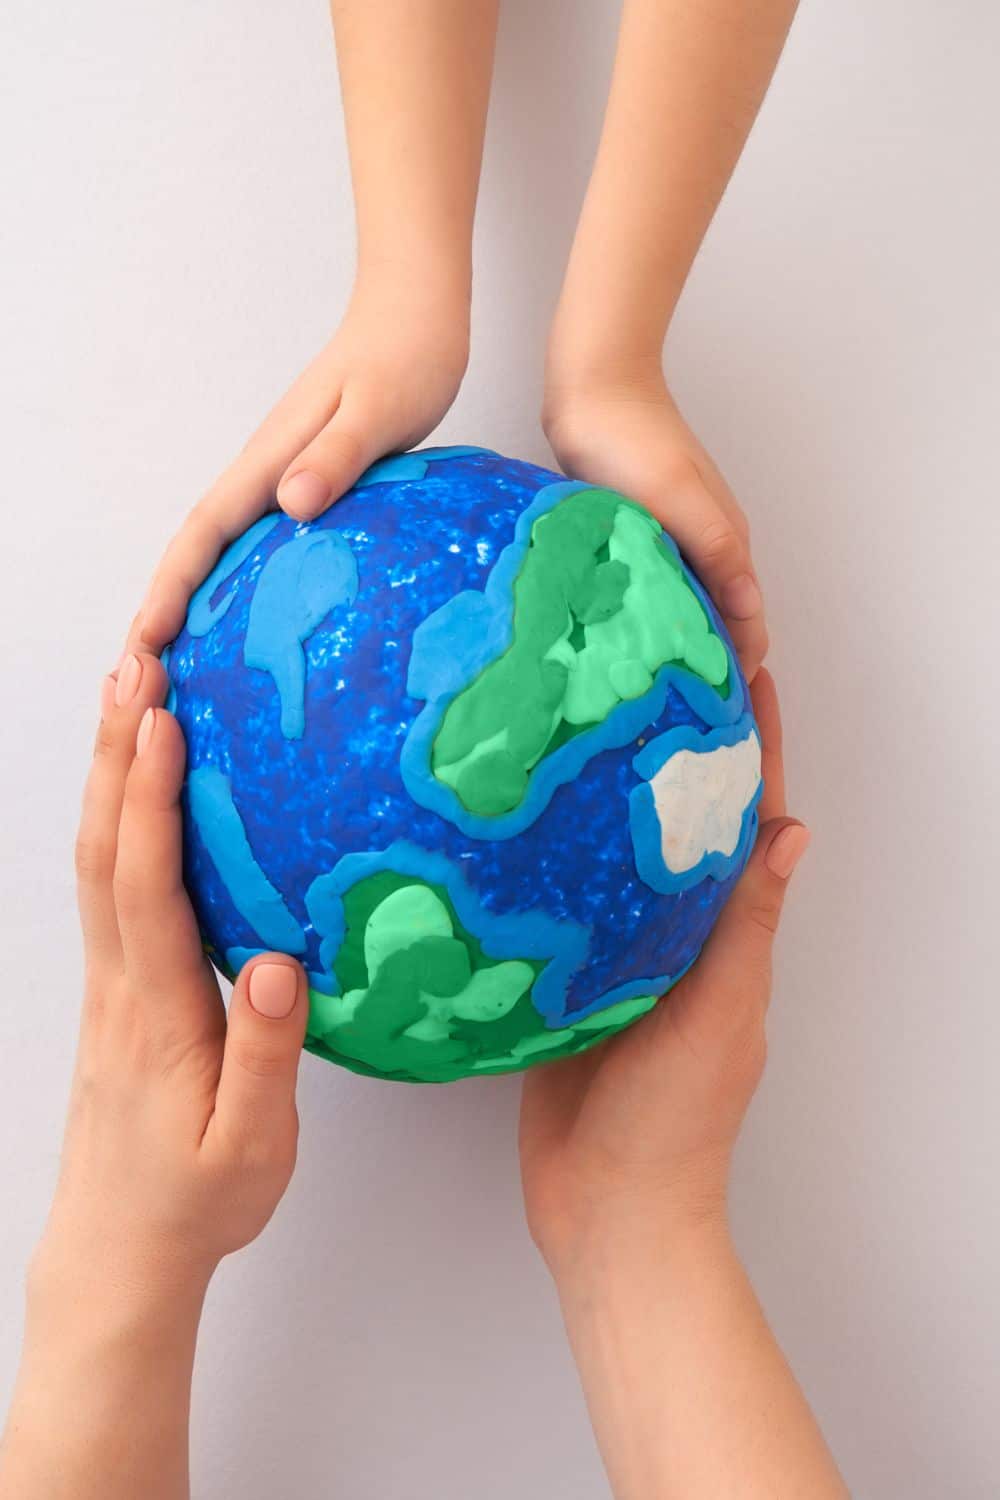 19 Best Earth Day Activities for the Whole Family